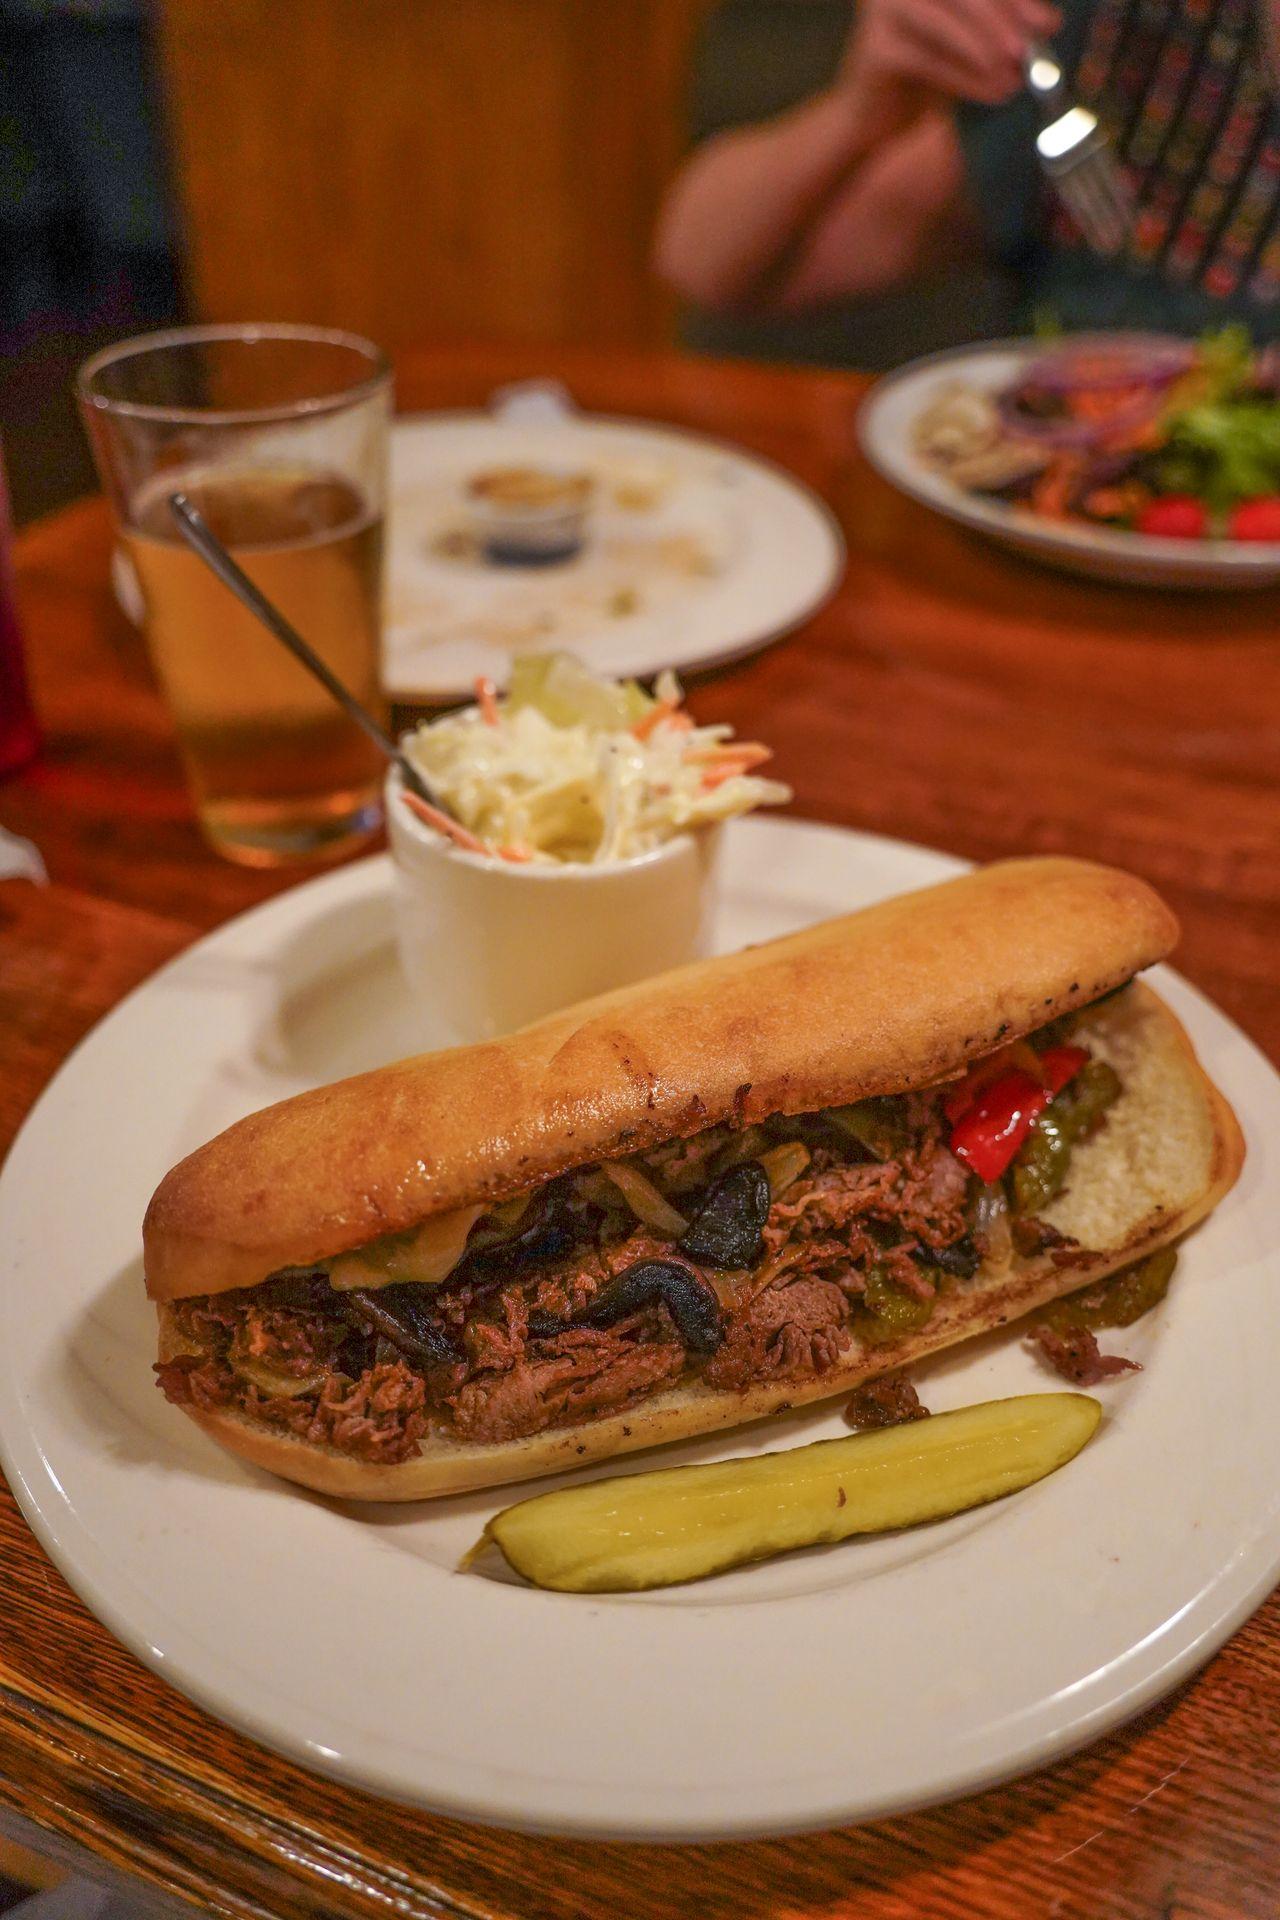 A philly cheesesteak with a pickle next to it from P J Harrigan's.